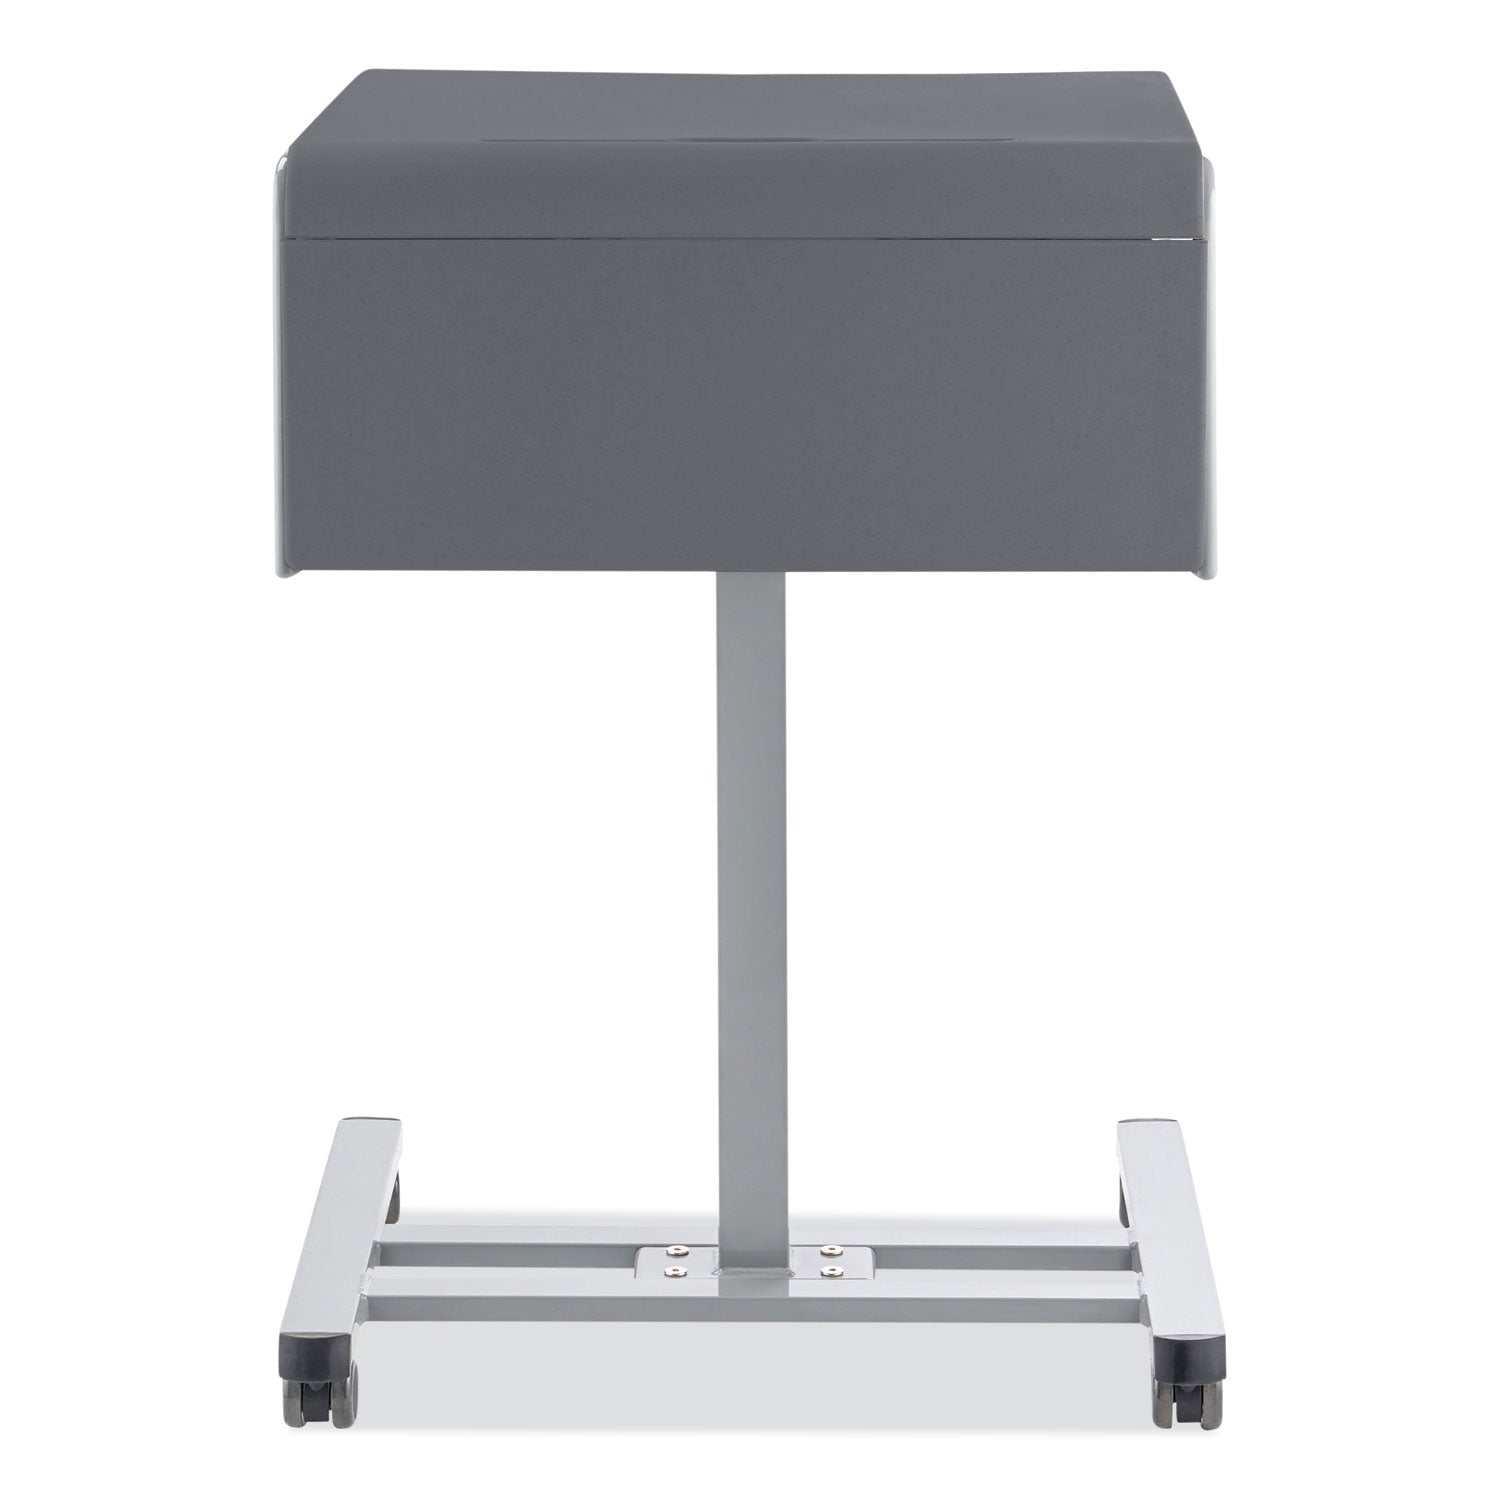 sit-stand-student-desk-pro-235-x-195-x-285-to-4175-charcoal-gray-ships-in-1-3-business-days_npsssdg20 - 3